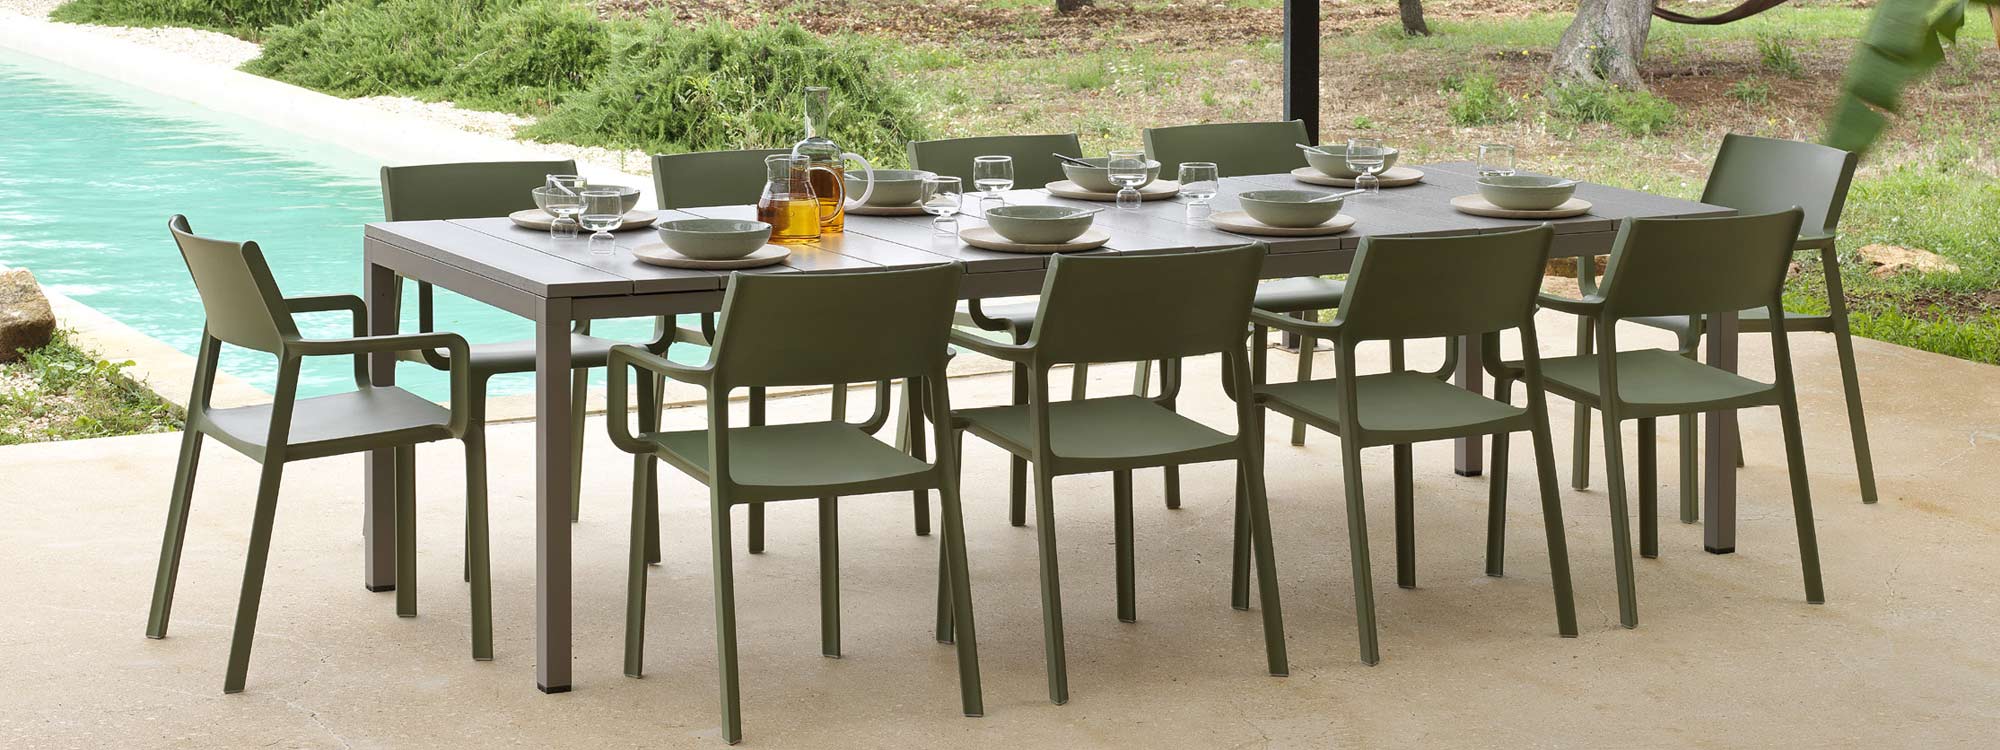 Image of Rio taupe garden table and agave coloured Trill garden chairs by Nardi, with olive trees and lawn in the background